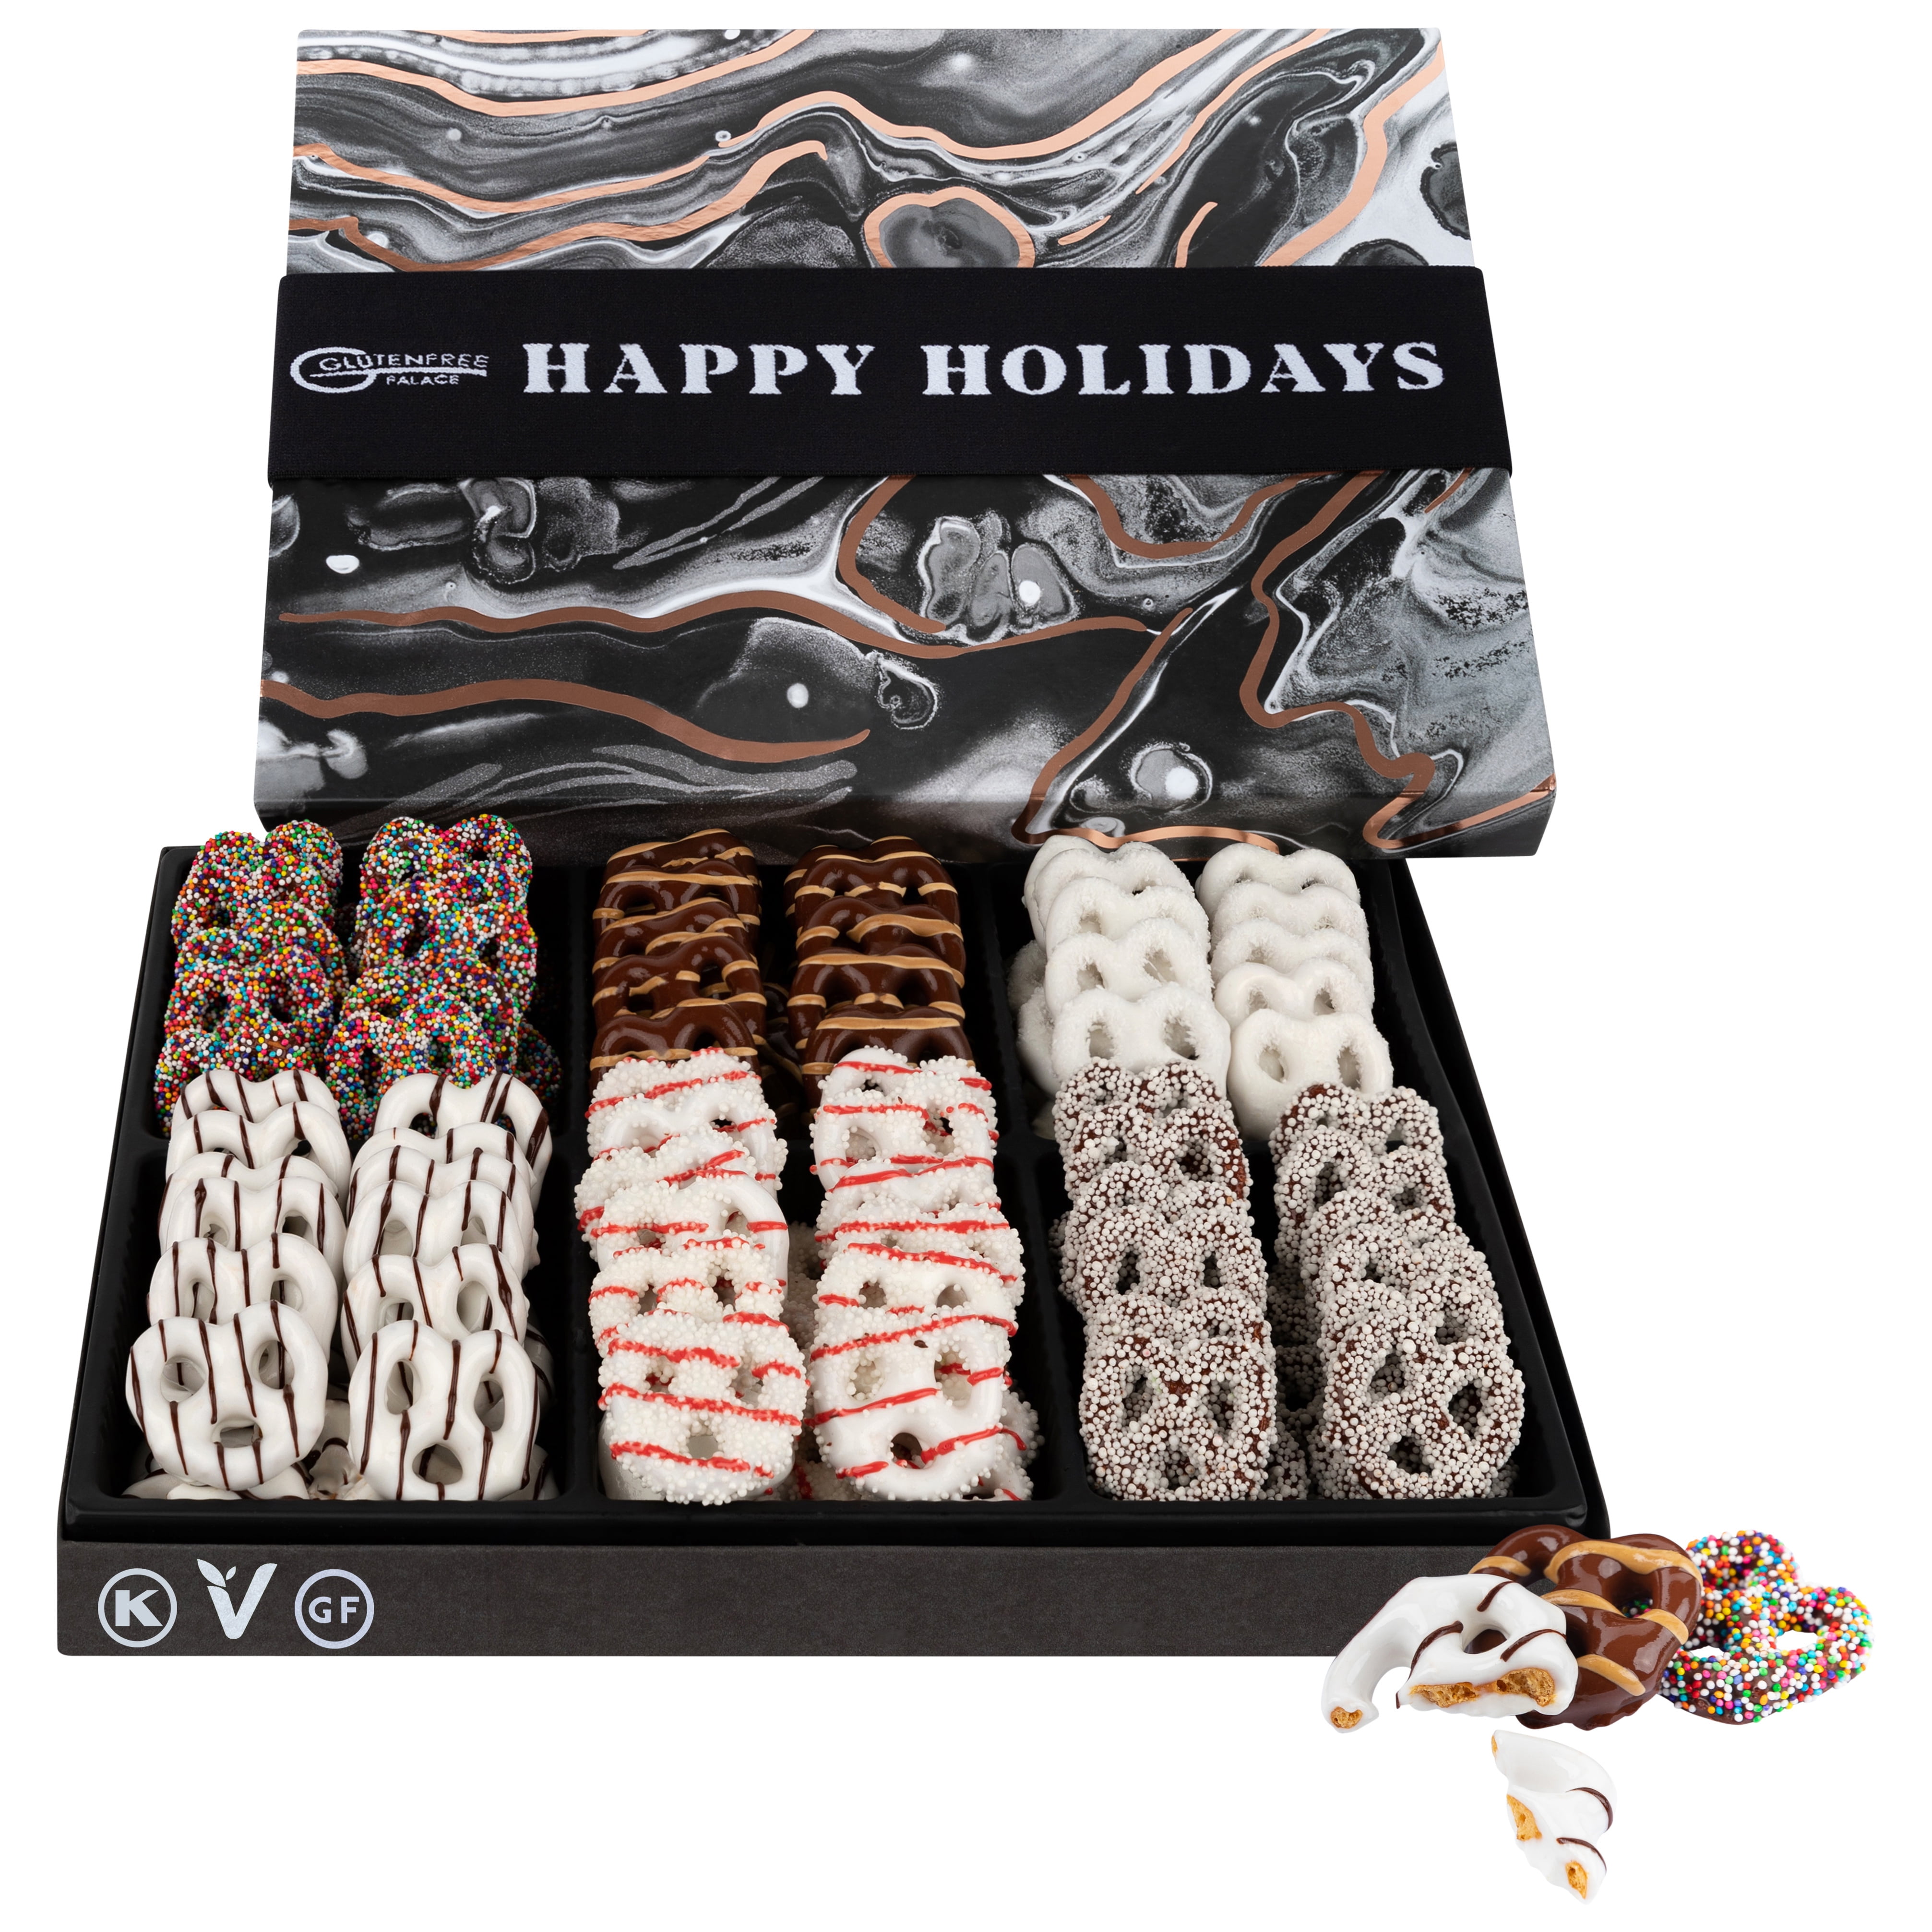 HAPPY HOLIDAY Gift Basket GLUTEN FREE, Chocolate Covered Pretzel Gift 6  Flavors Gourmet Holiday Gift, Same Day Delivery Items for Christmas, New  Years, Corporate Gift